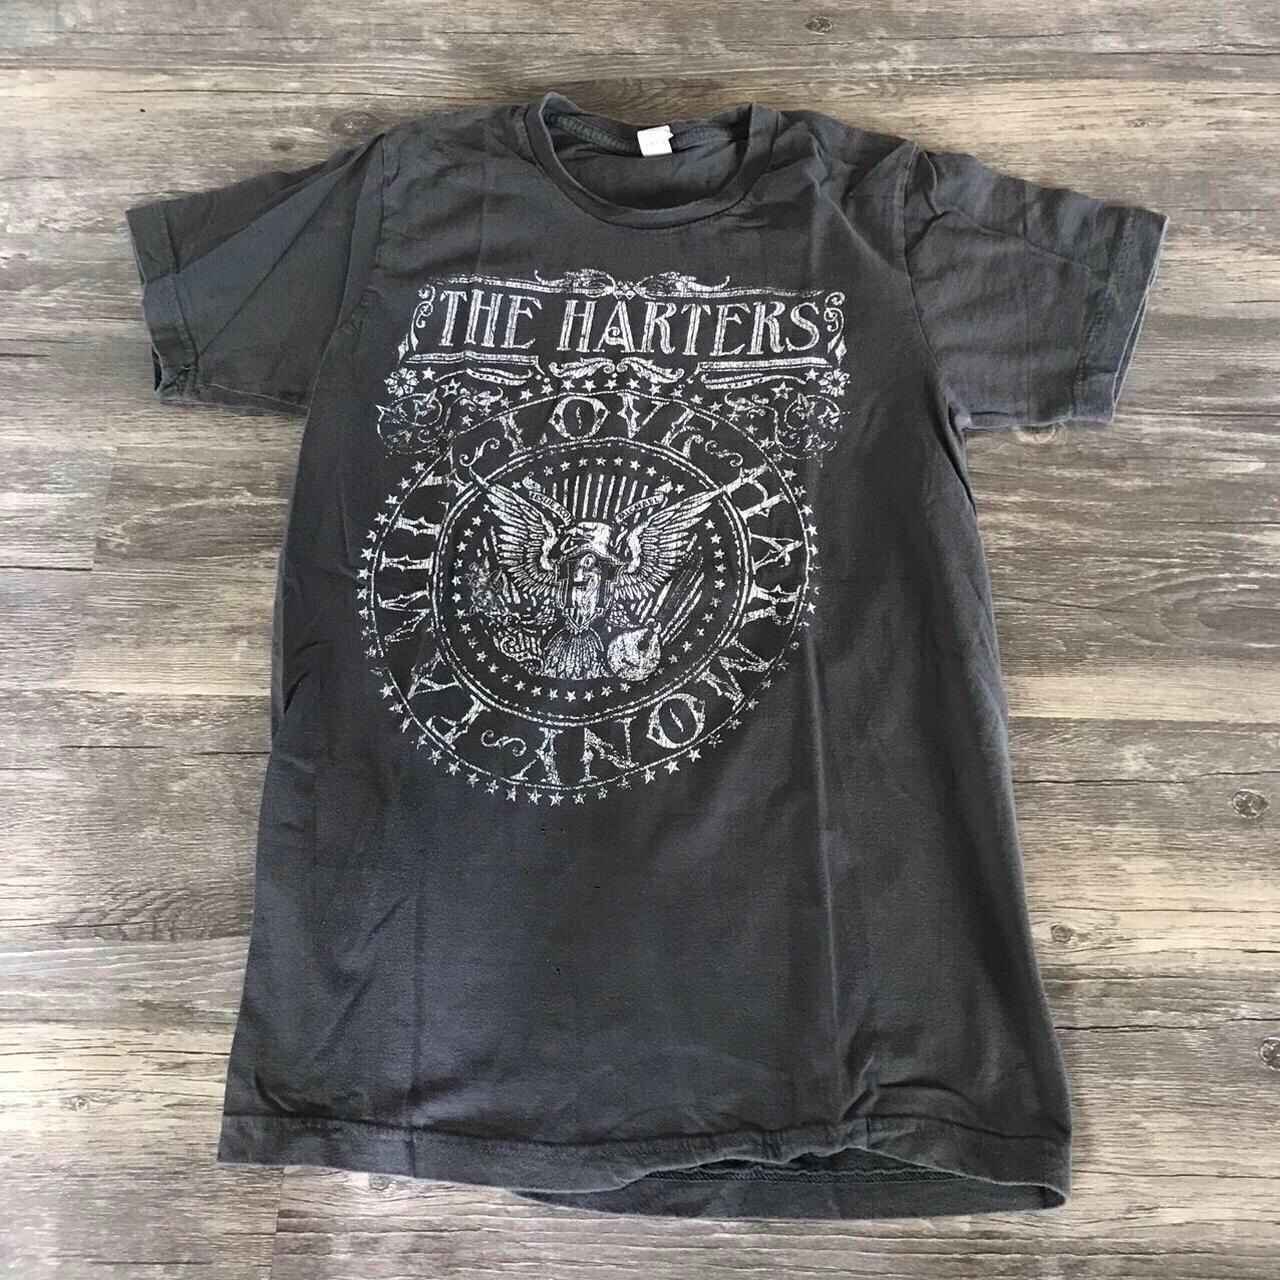 Hot Topic Men's Grey and White T-shirt